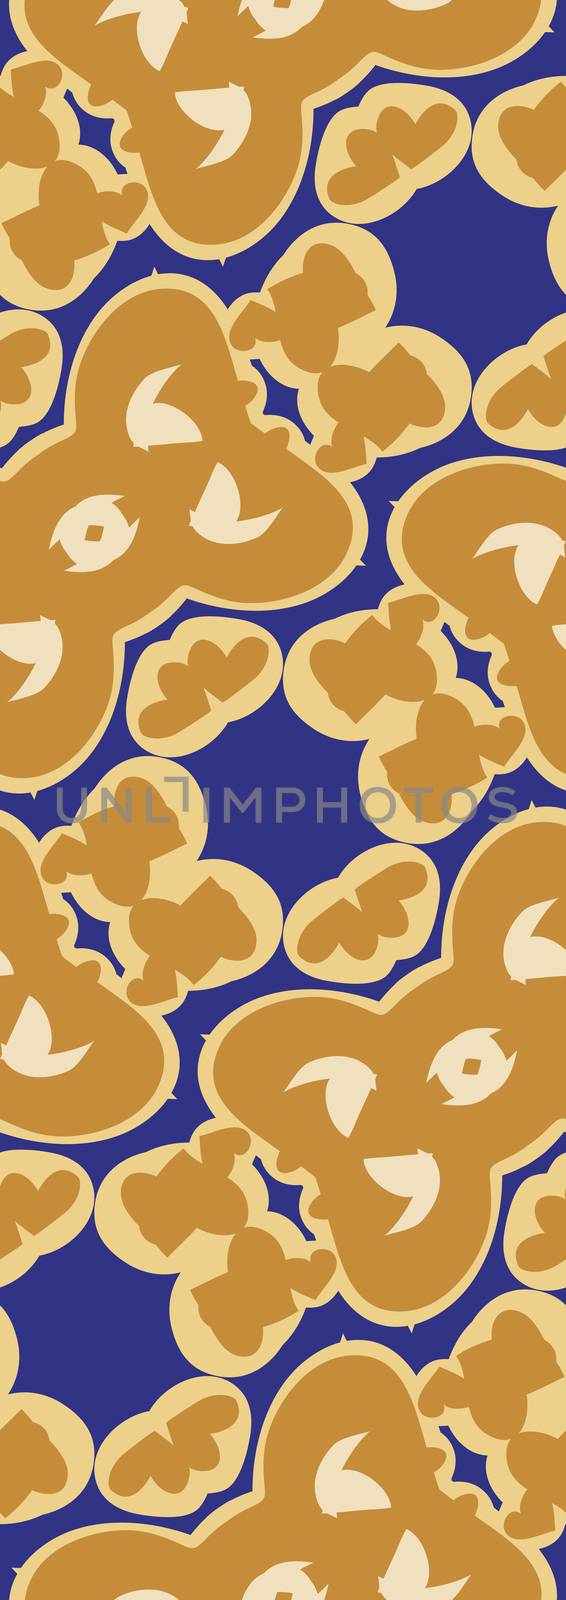 Random brown shapes in repeating blue background pattern